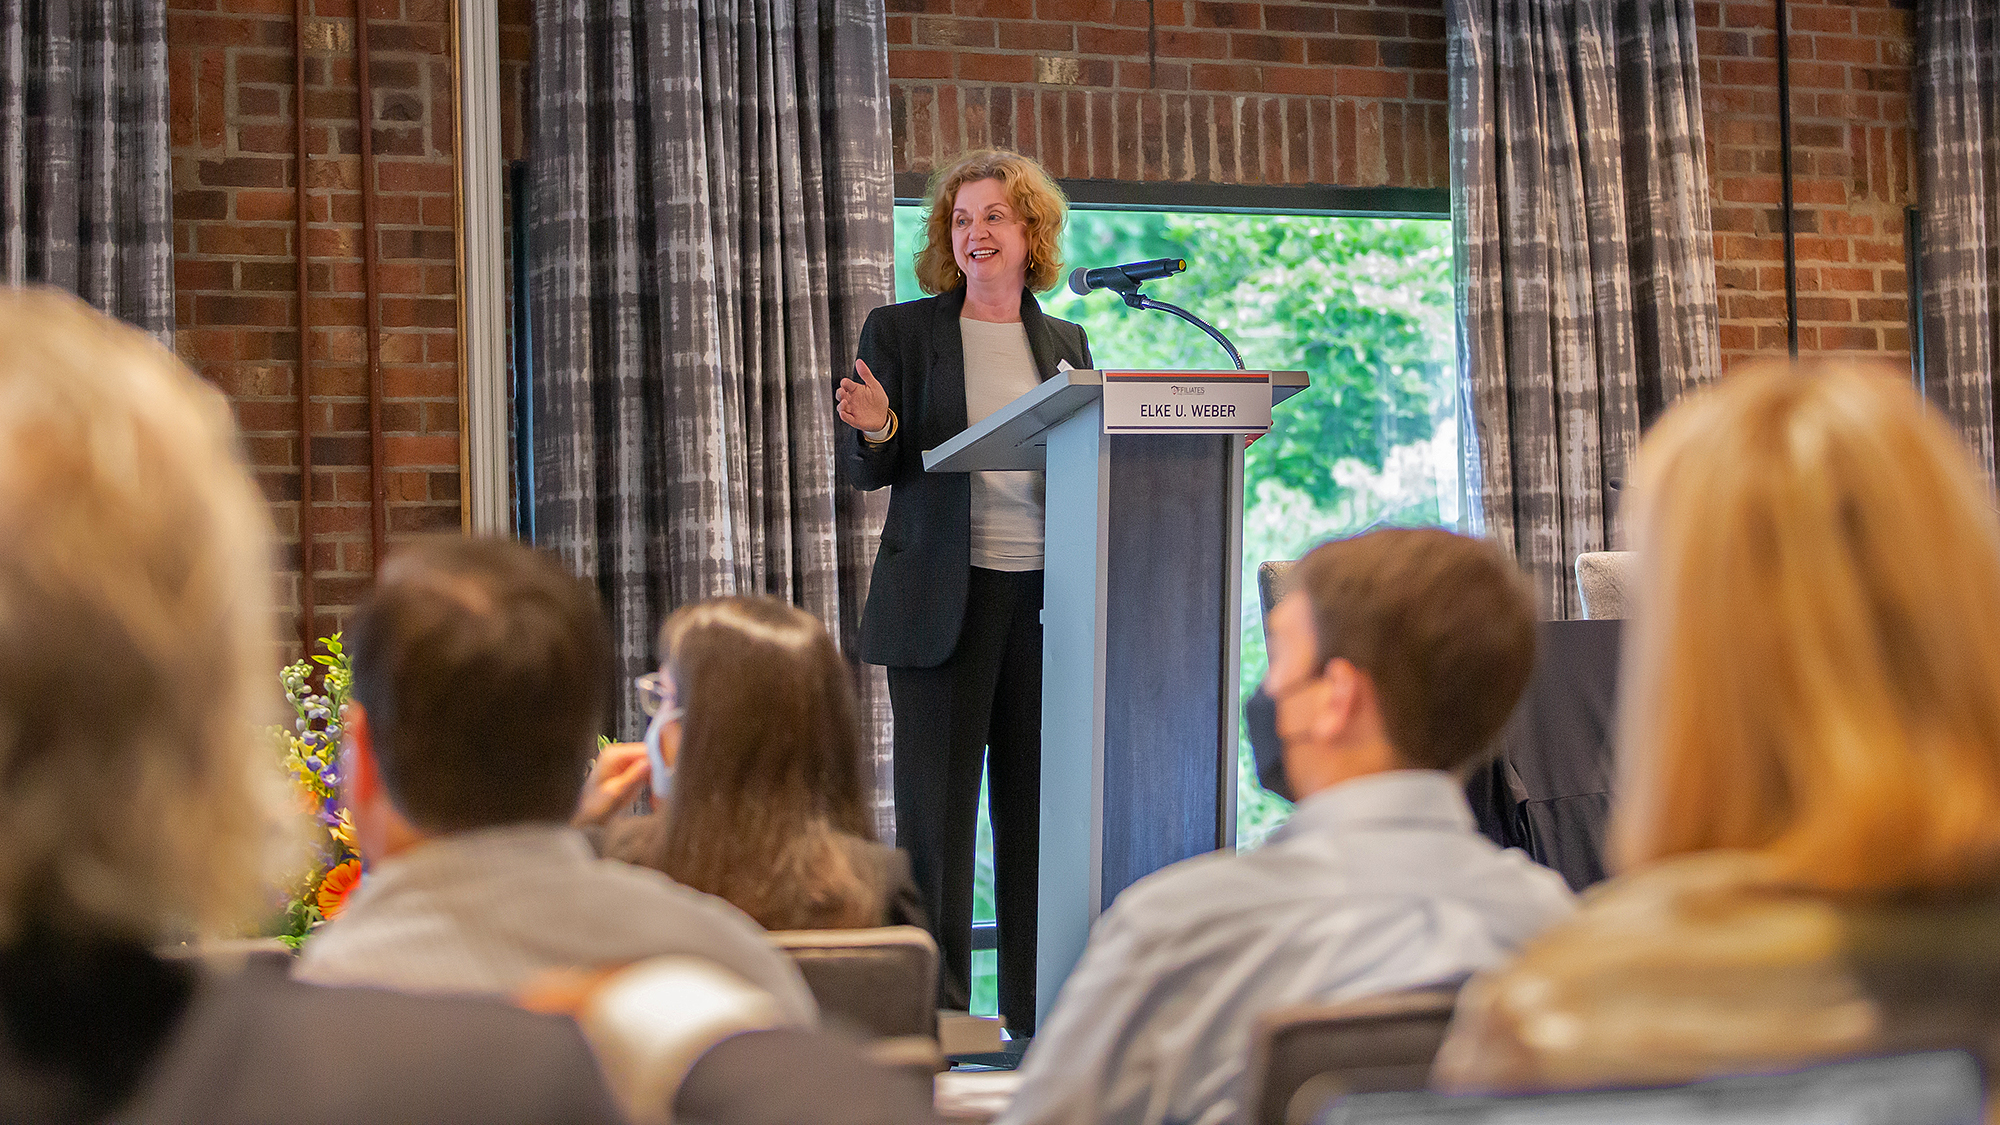 Elke Weber emphasizes that energy and environmental policy can be strengthened using behavioral science tools. (Photo by Kevin Birch)